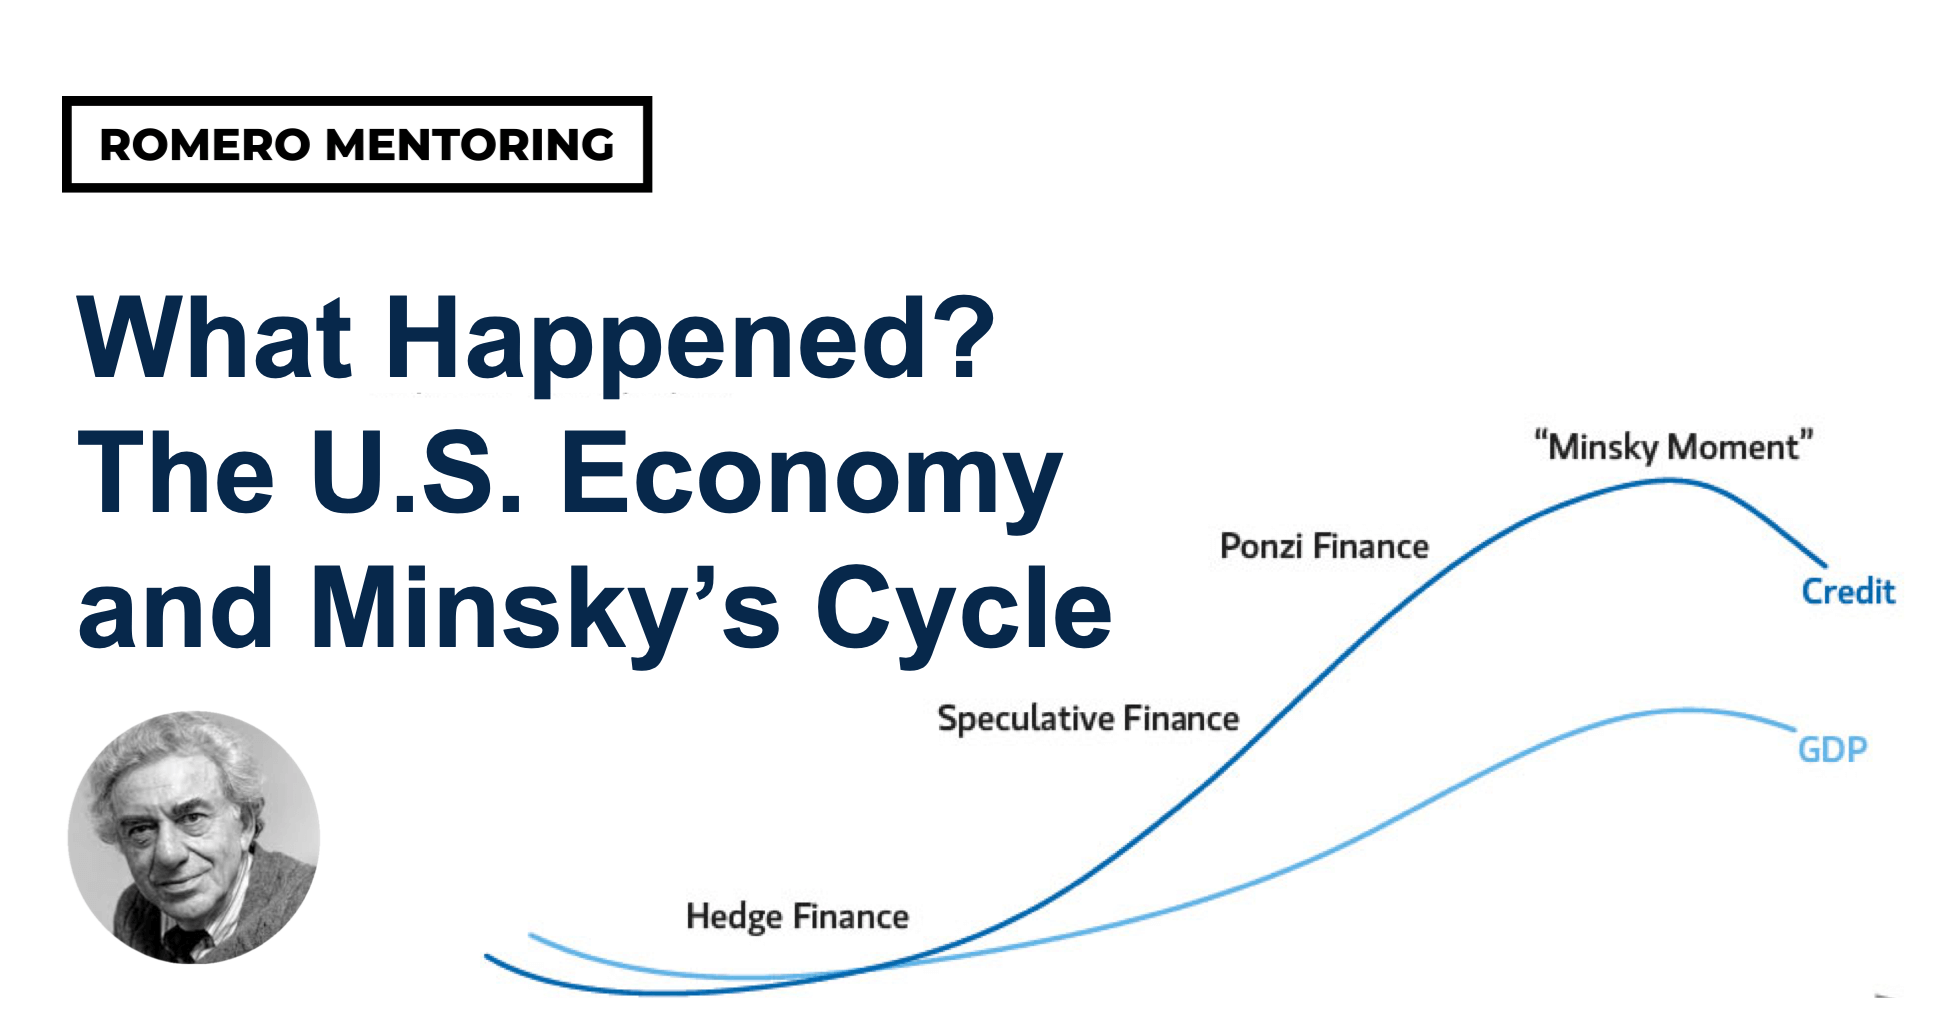 What Happened? The U.S. Economy and Minsky’s Cycle